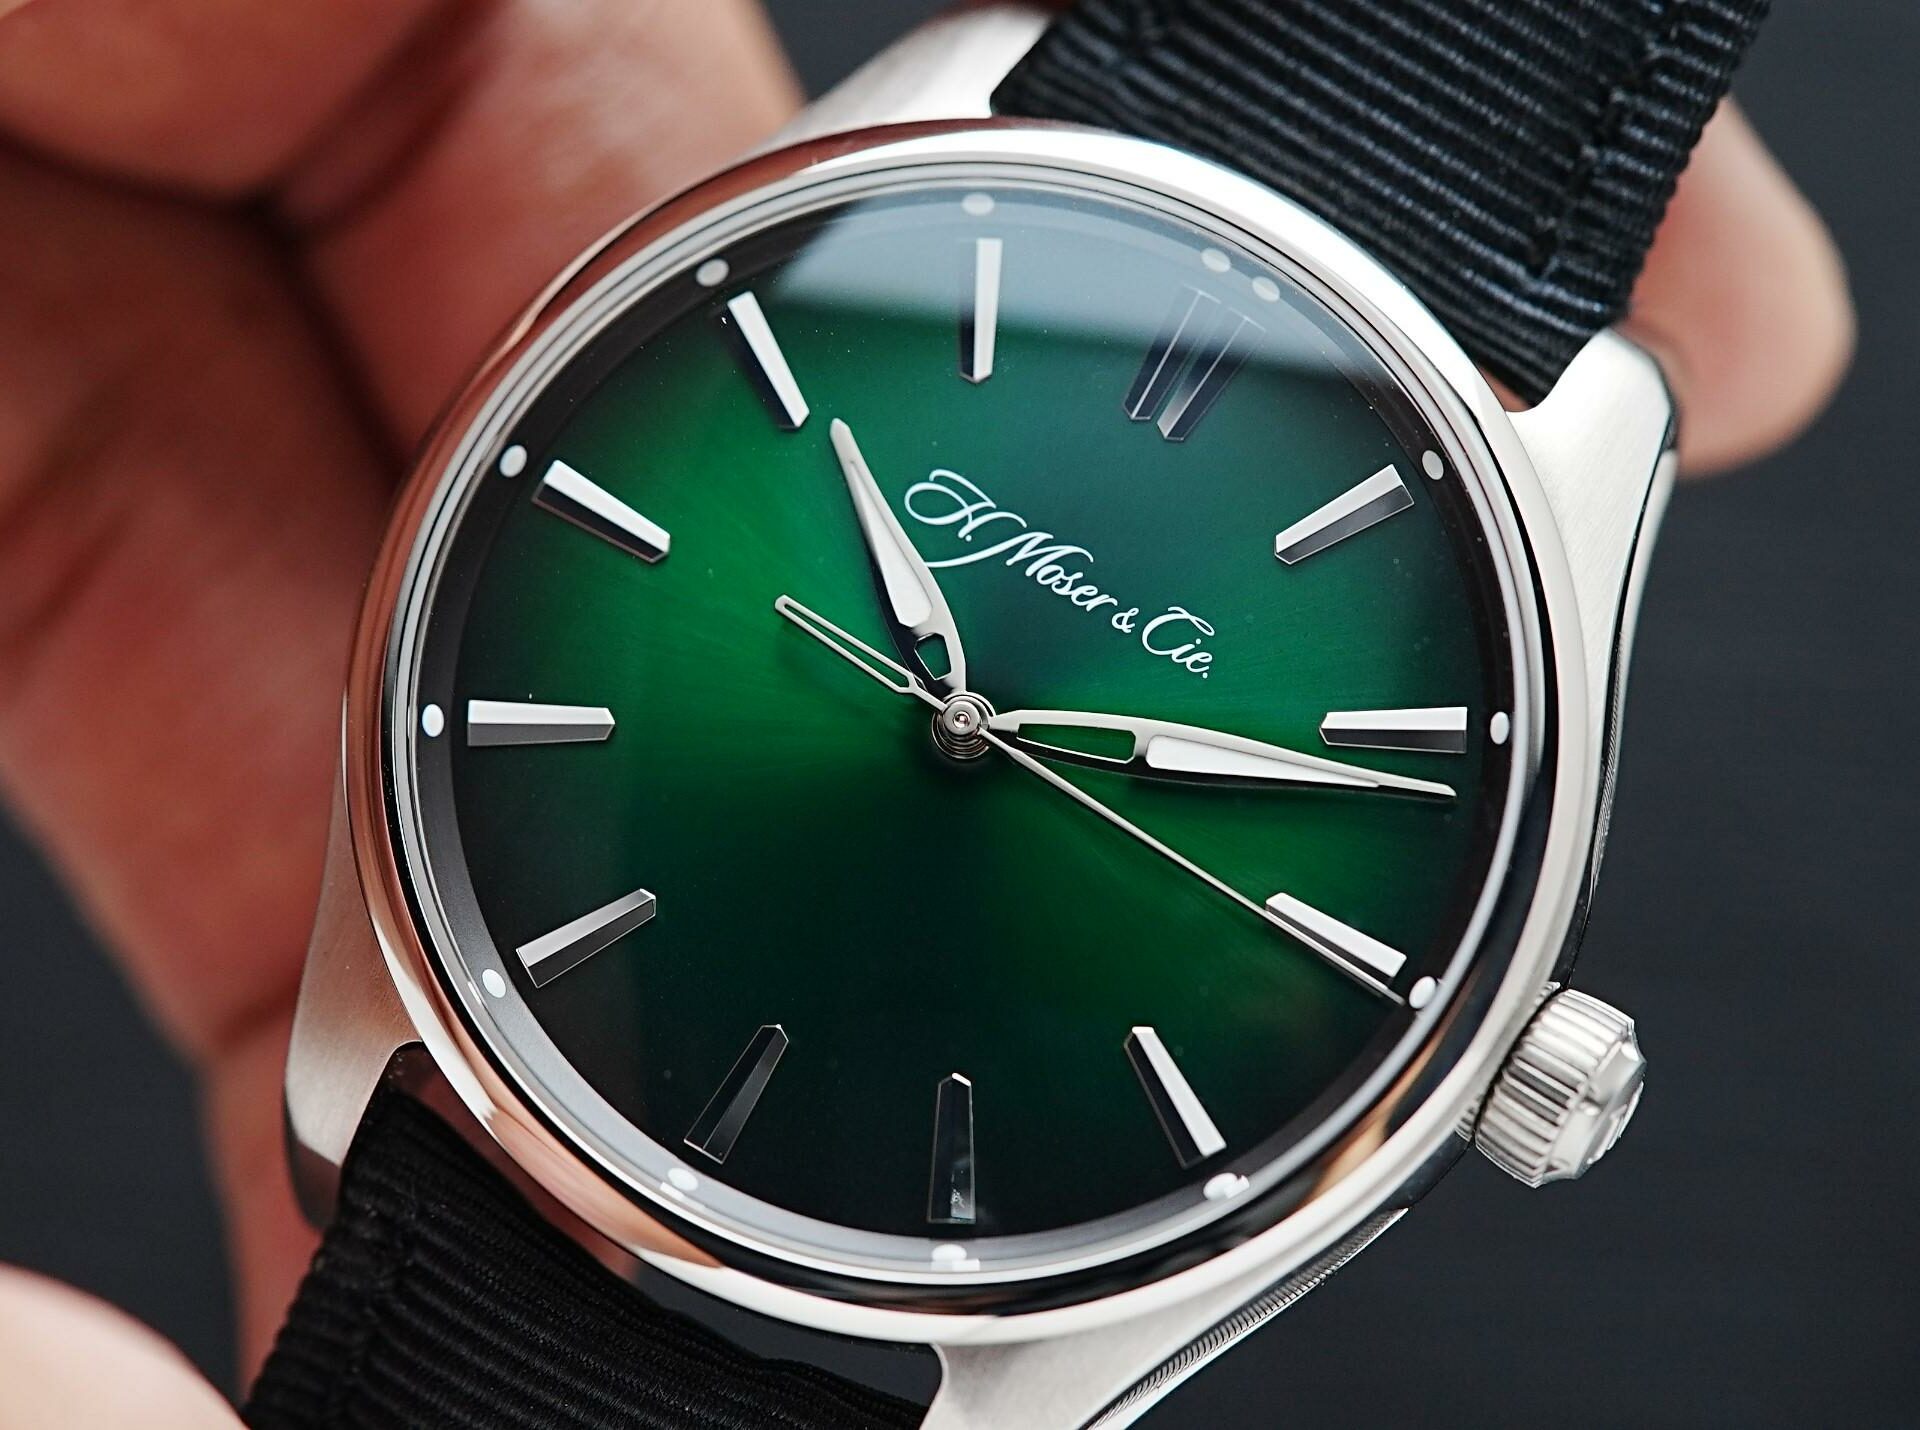 H.Moser & Cie. Pioneer Centre Seconds Cosmic Green held in hand.